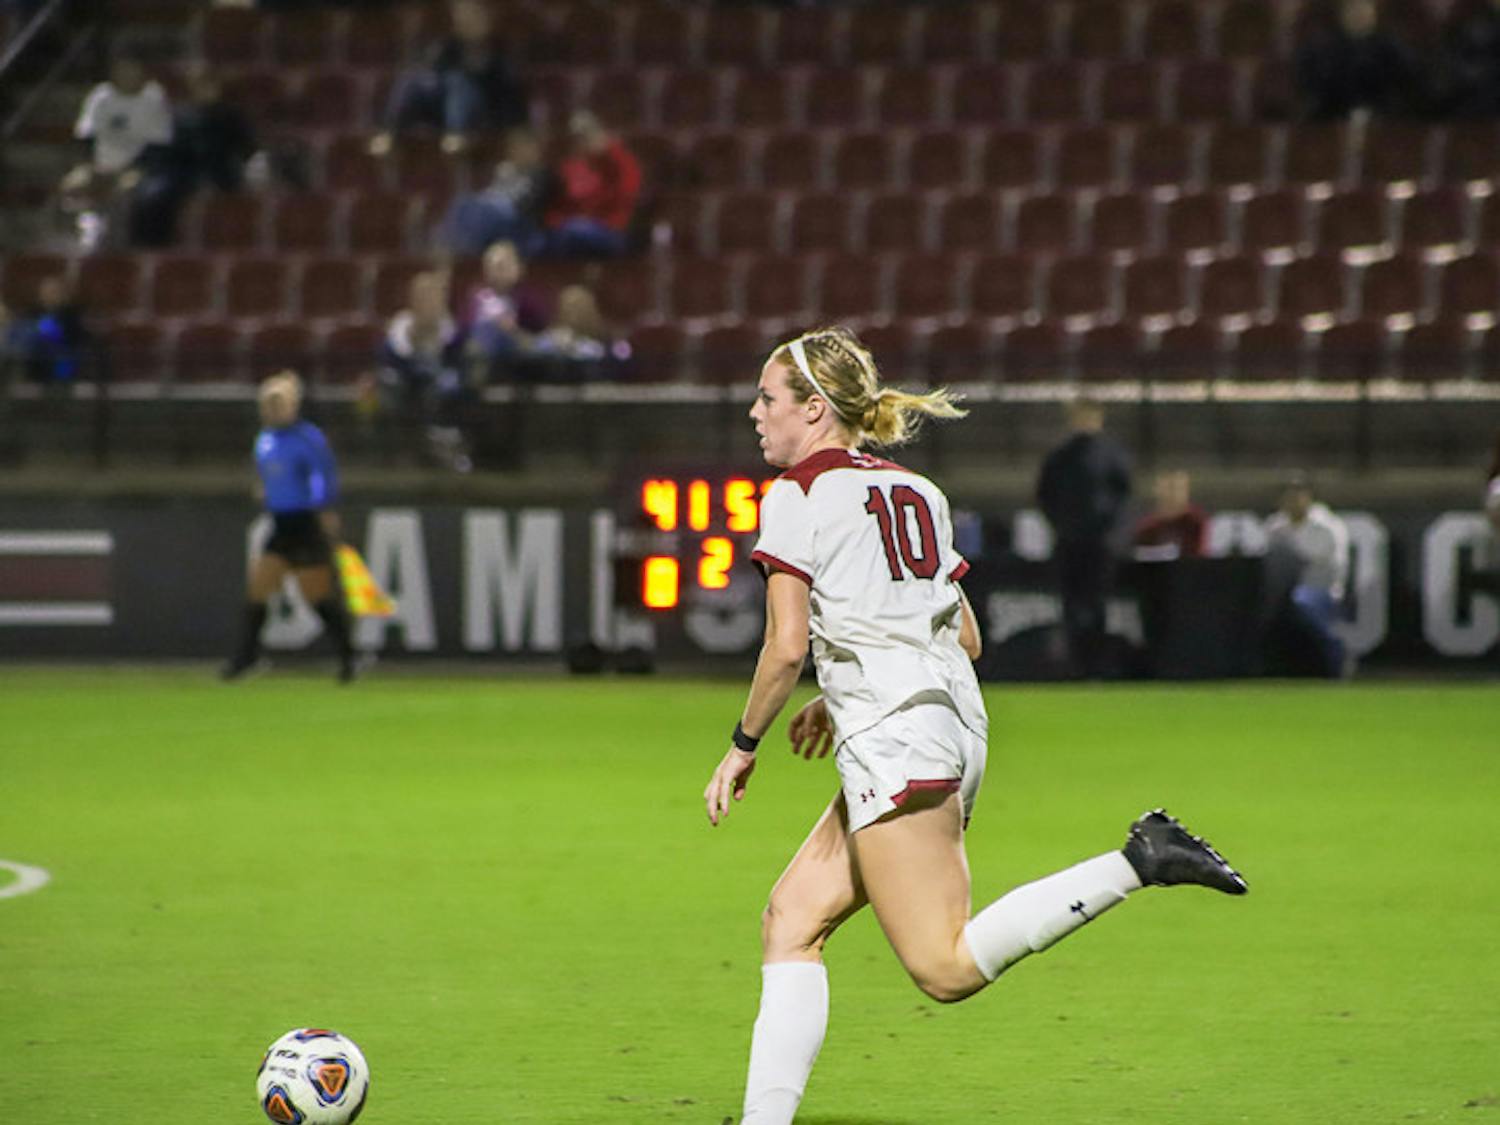 Catherine Barry breaks away and sprints down the field scoring the only goal of the game. South Carolina beat Florida 1-0 on September 28th, 2022.